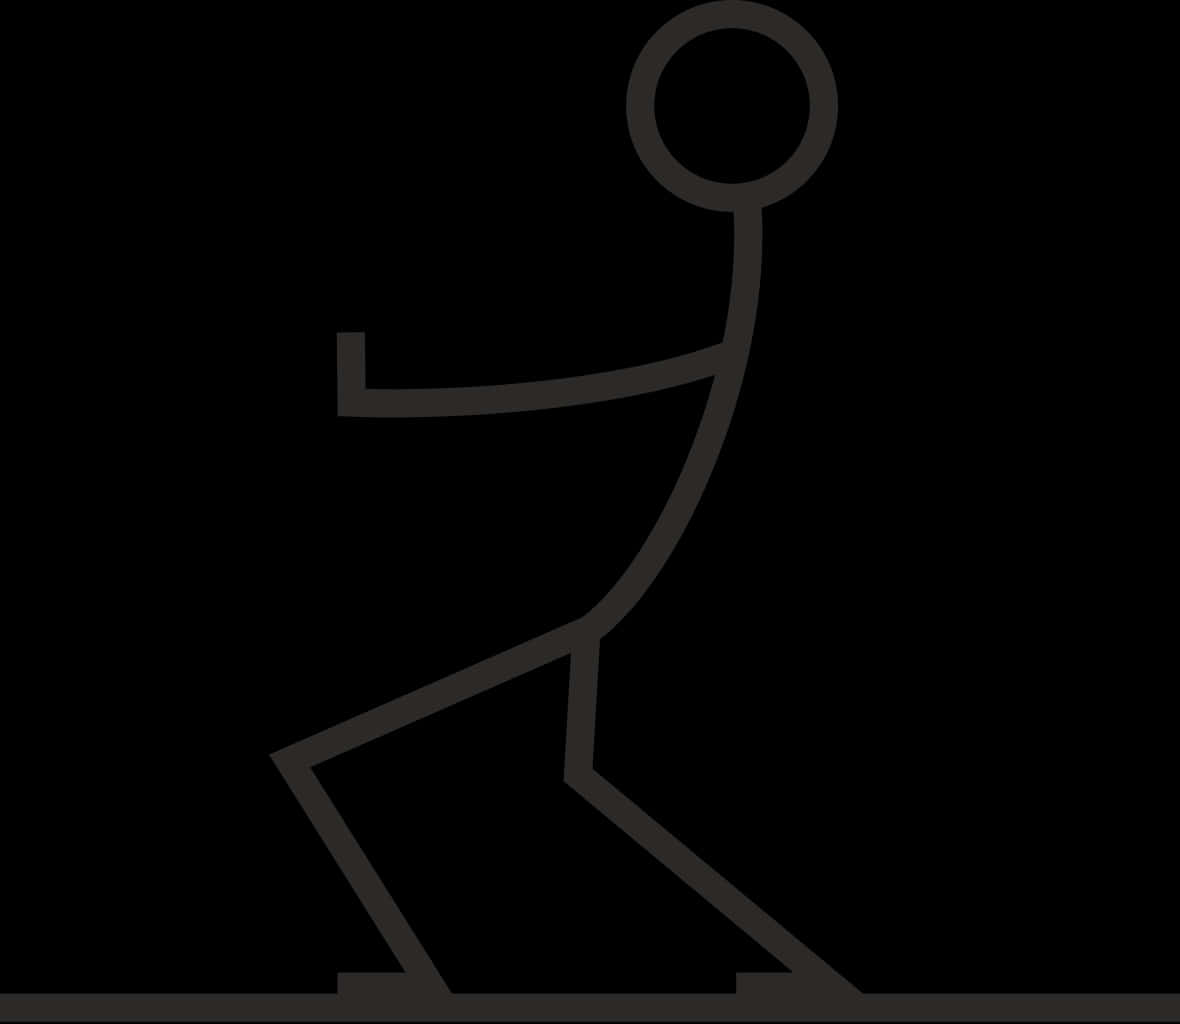 Stick Figure In Motion.png PNG